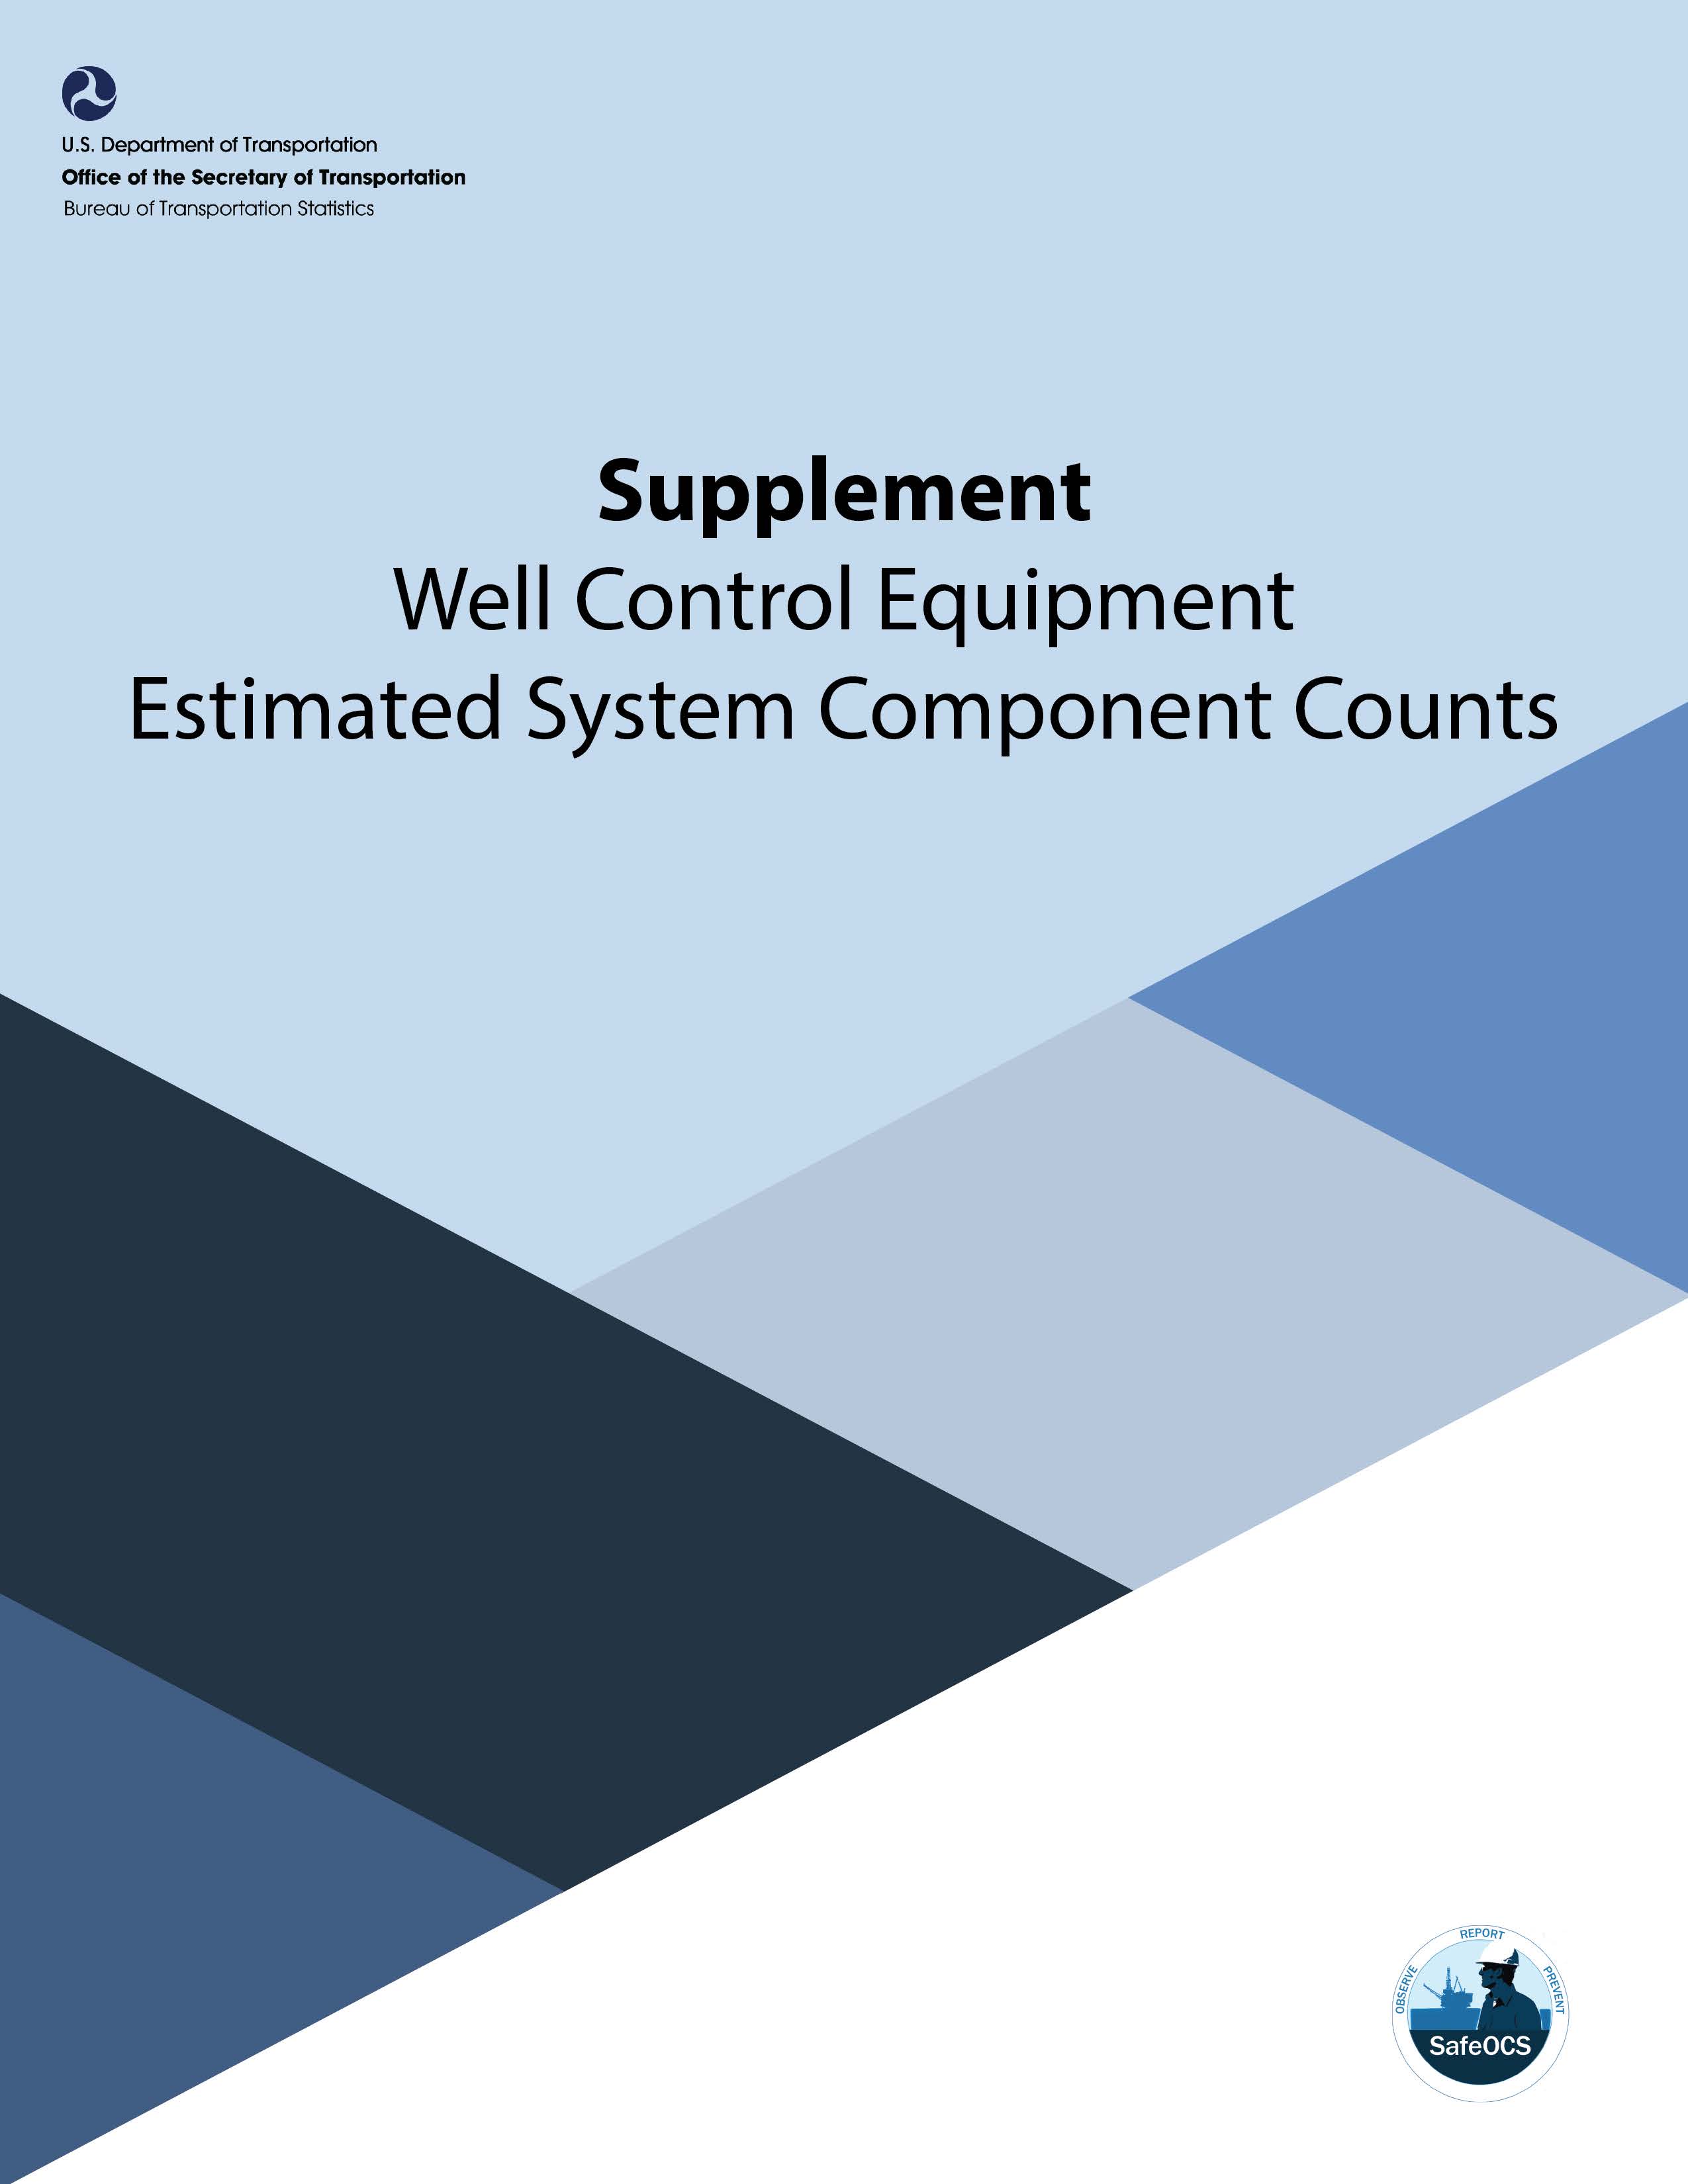 WCE Component Counts cover